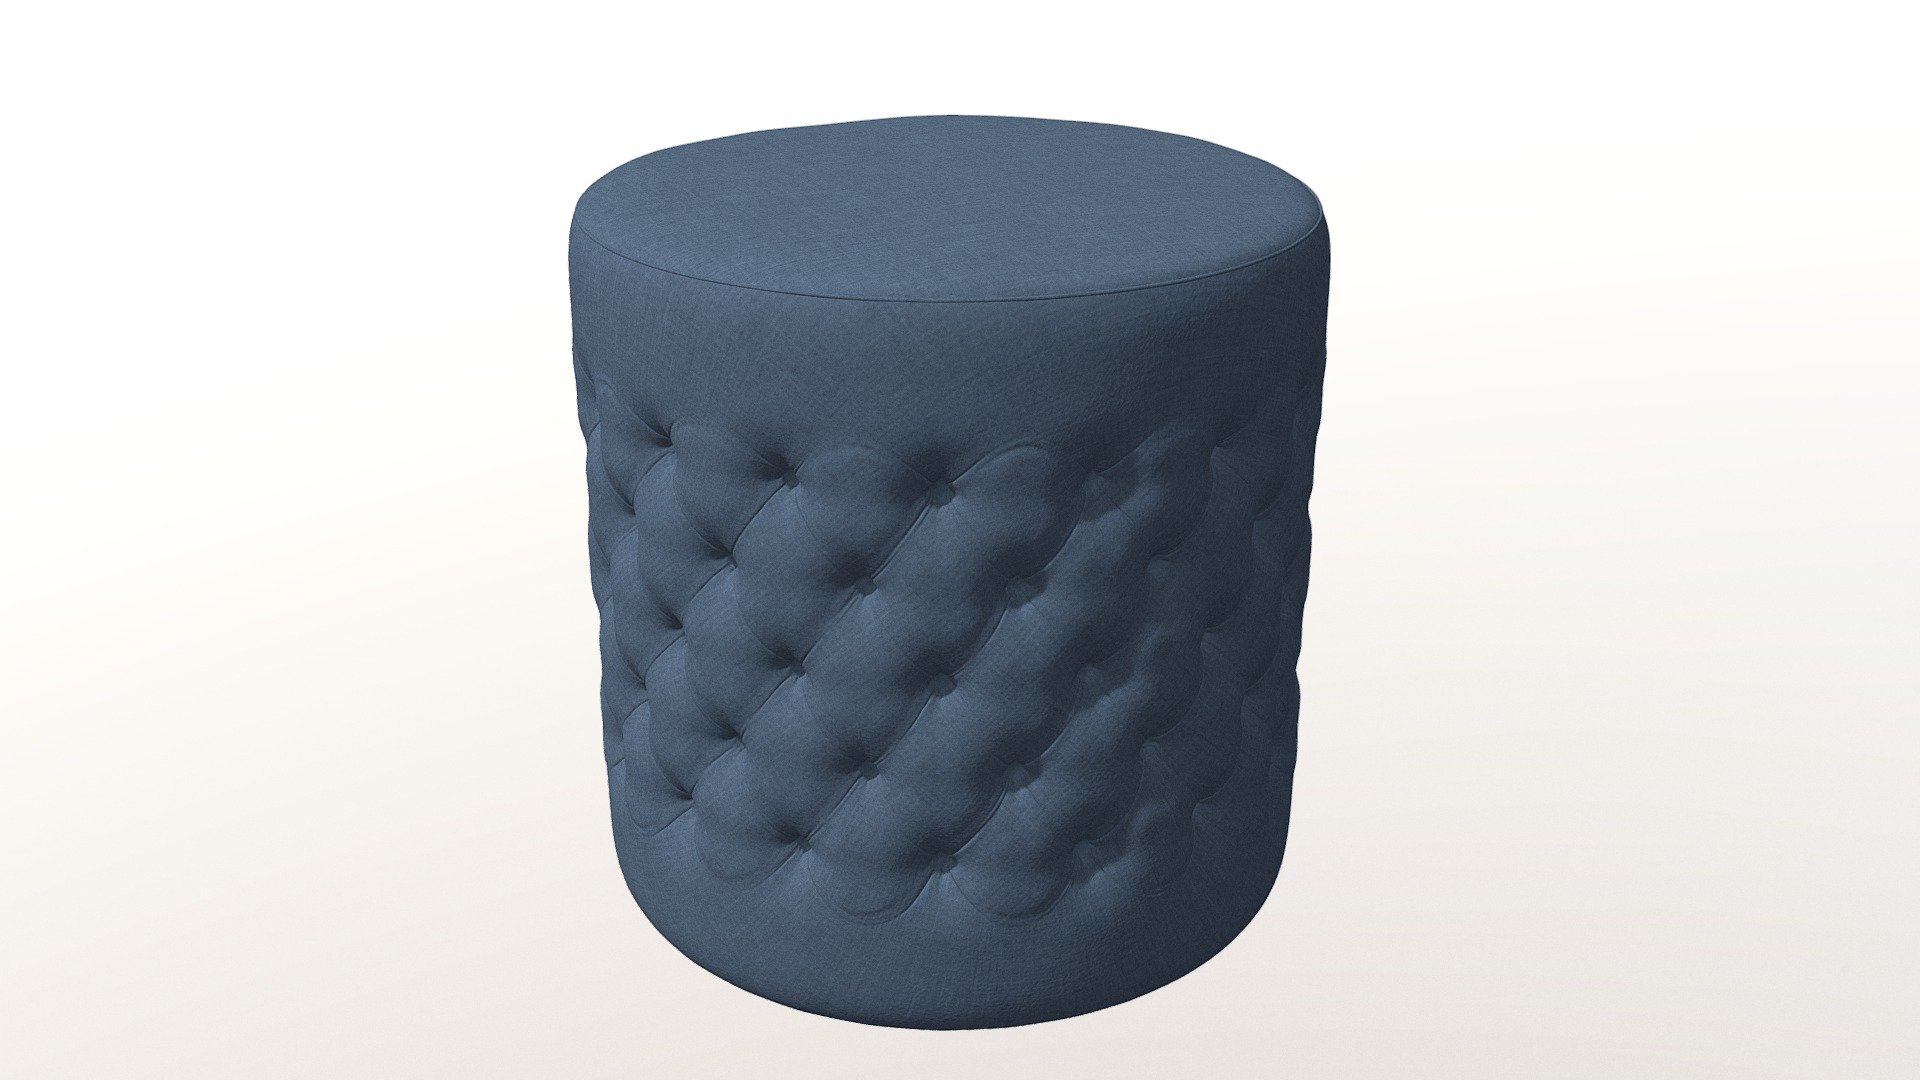 Tufted ottoman stool round model is a good prop for interior visualization scenes.

Available formats are .fbx and .obj(.mtl)

This chair is modeled in Blender and rendered with Cycles render engine. 

All the texture maps are also available for download

Go ahead and use this model in your scene and I hope you like it.
 - Tufted ottoman stool round Blue 3D model - Buy Royalty Free 3D model by CG_VIZ 3d model